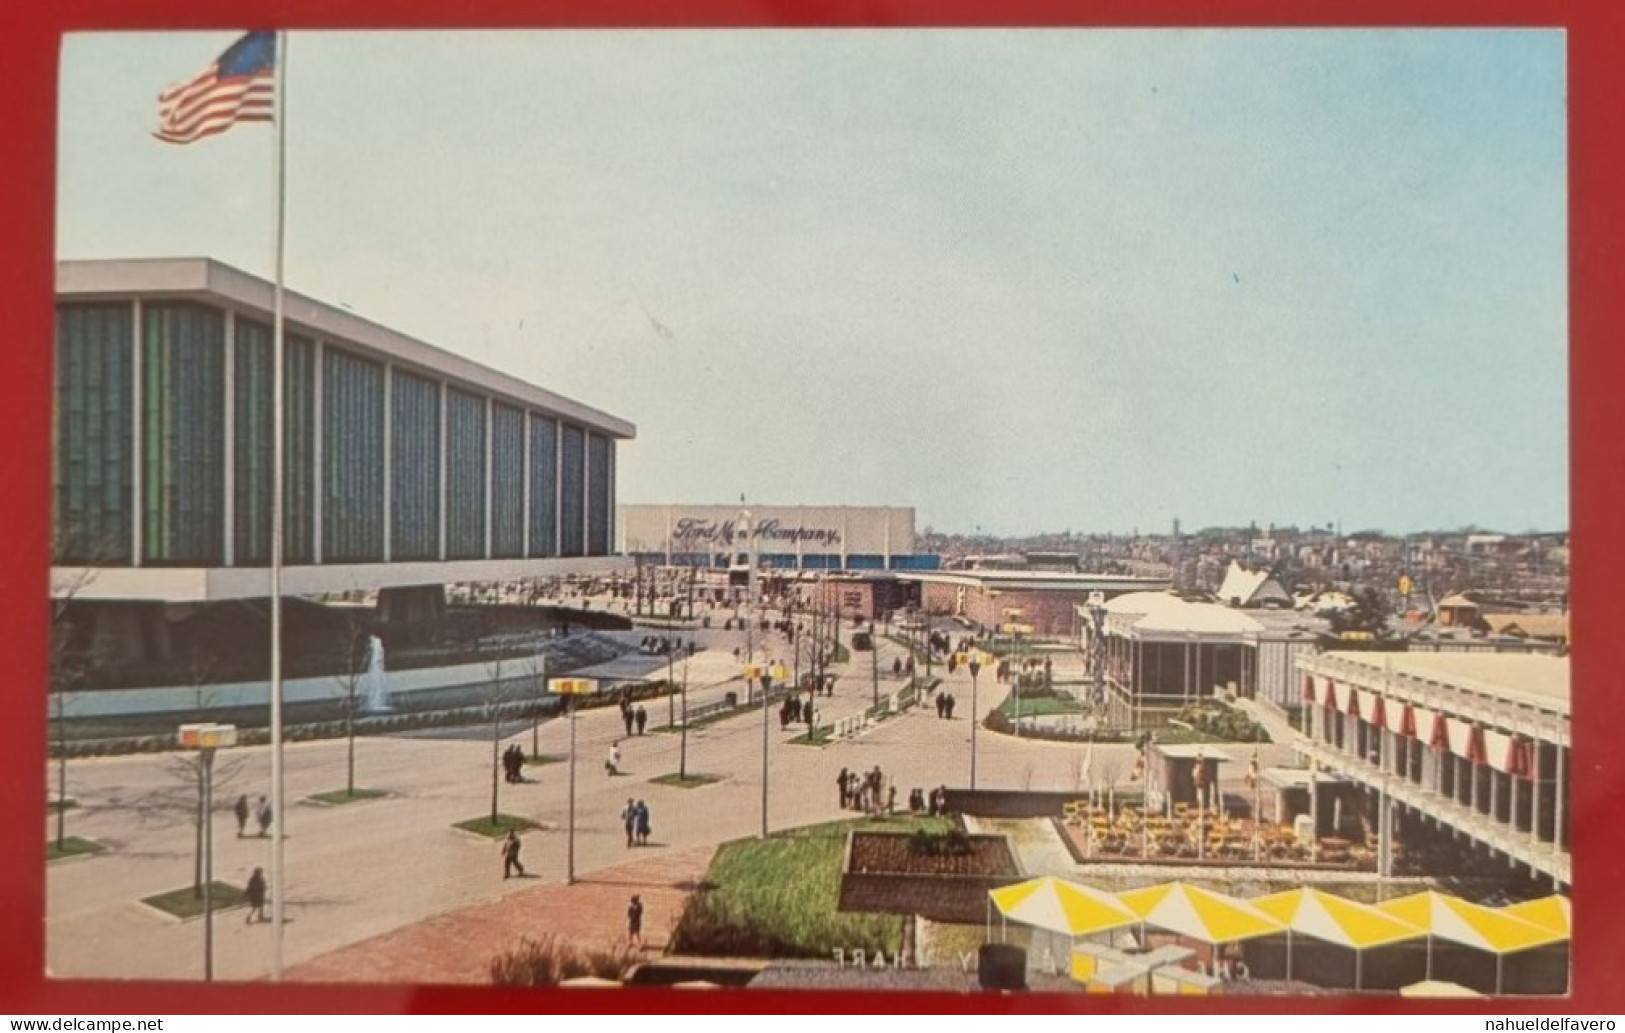 Uncirculated Postcard - USA - NY, NEW YORK WORLD'S FAIR 1964-65 - KENNEDY CIRCLE LOOKING SOUTHWEST - Exhibitions